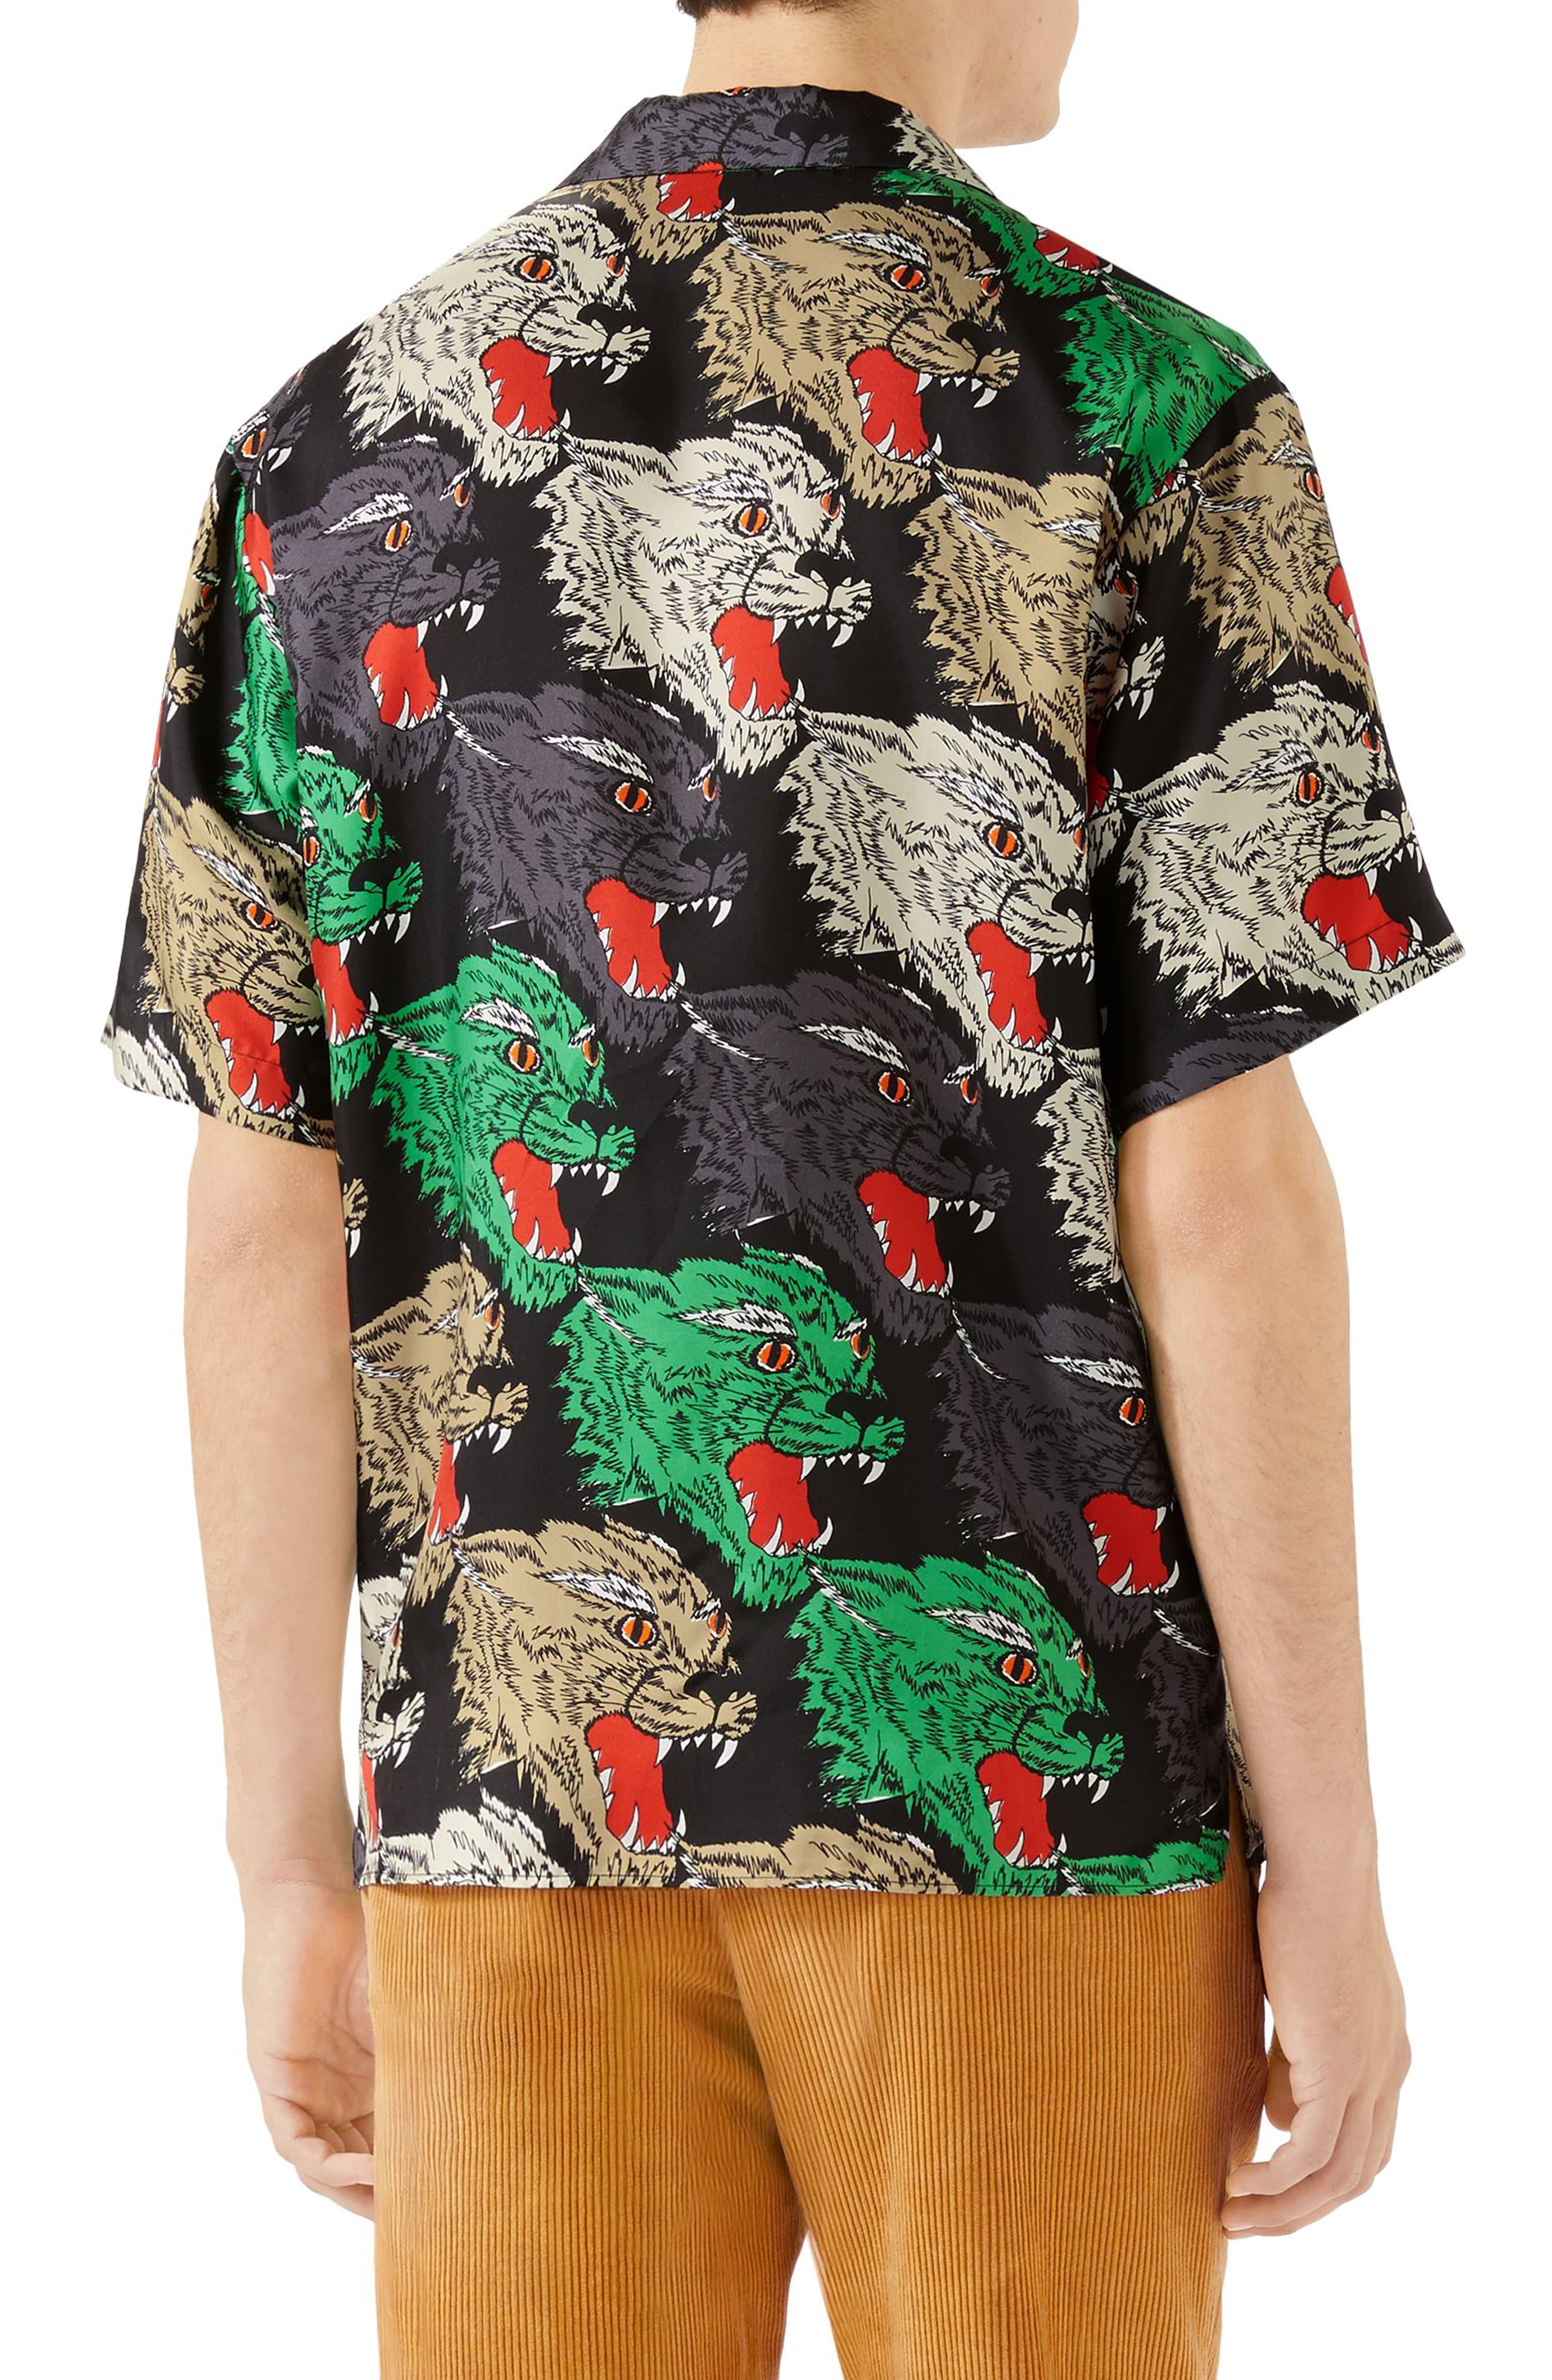 Gucci Men's Multicolor Panther-print Silk Shirt in Black for Men - Lyst